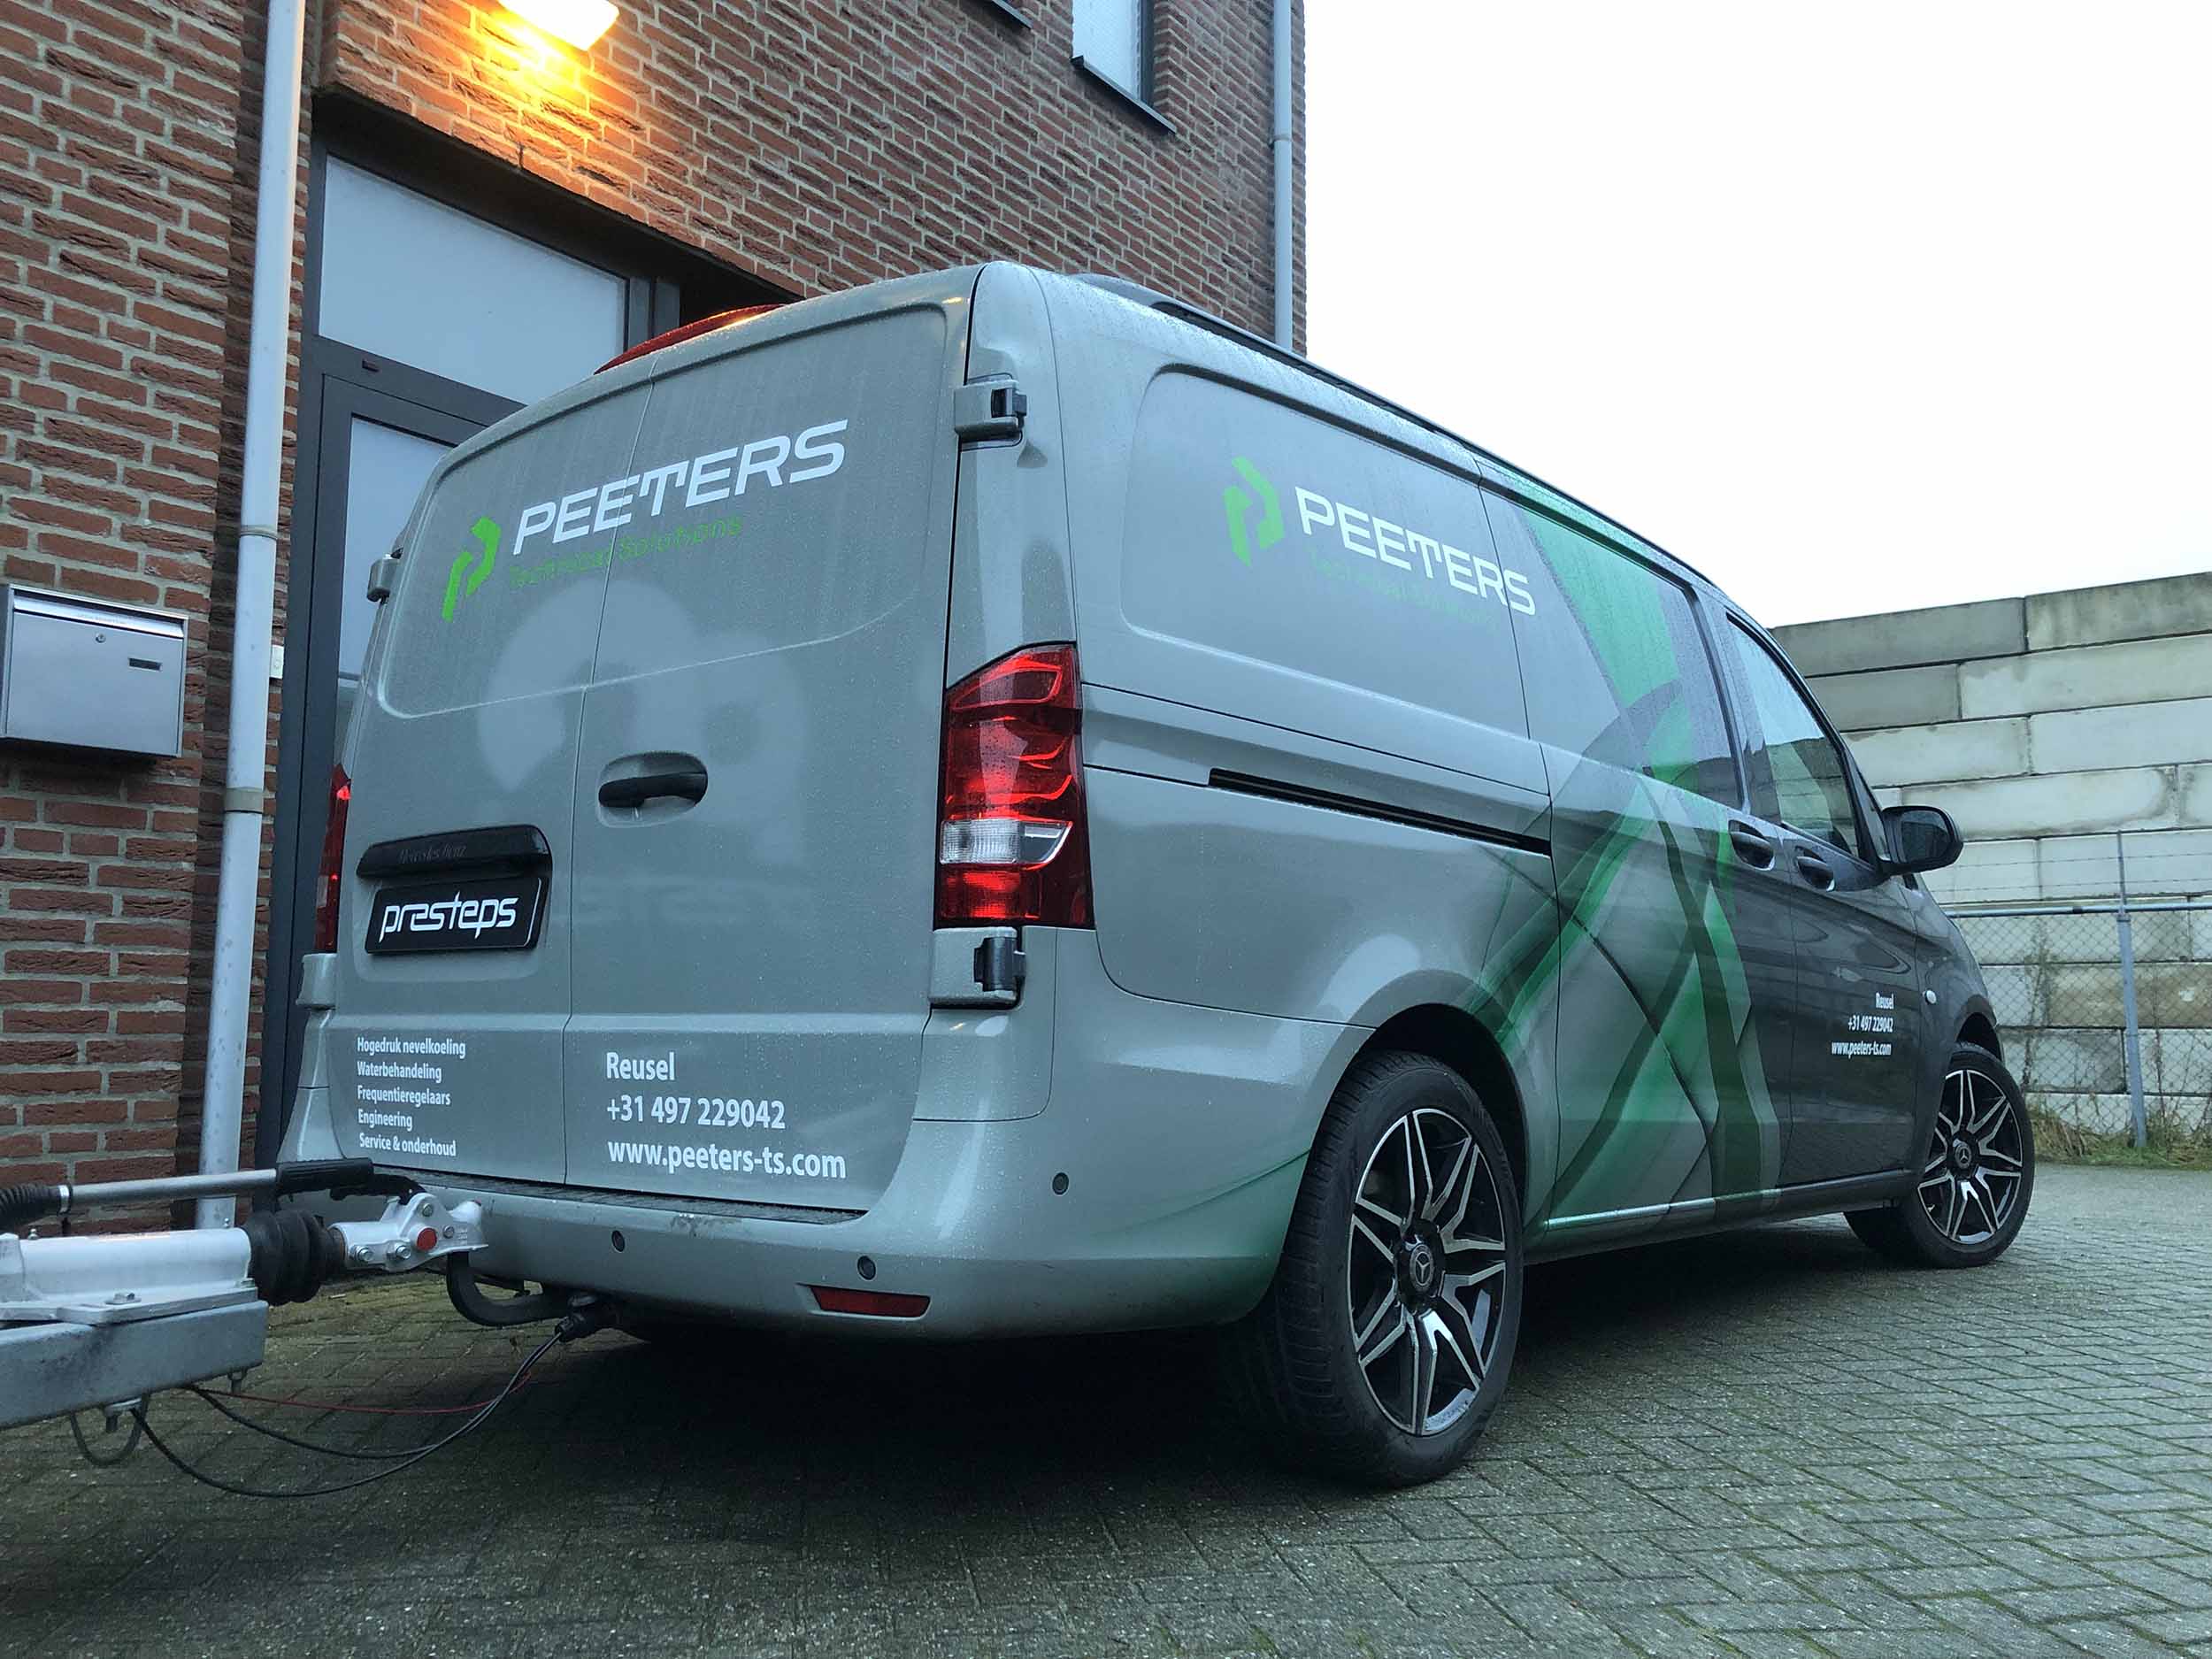 Busbelettering Vito Peeters technical solutions